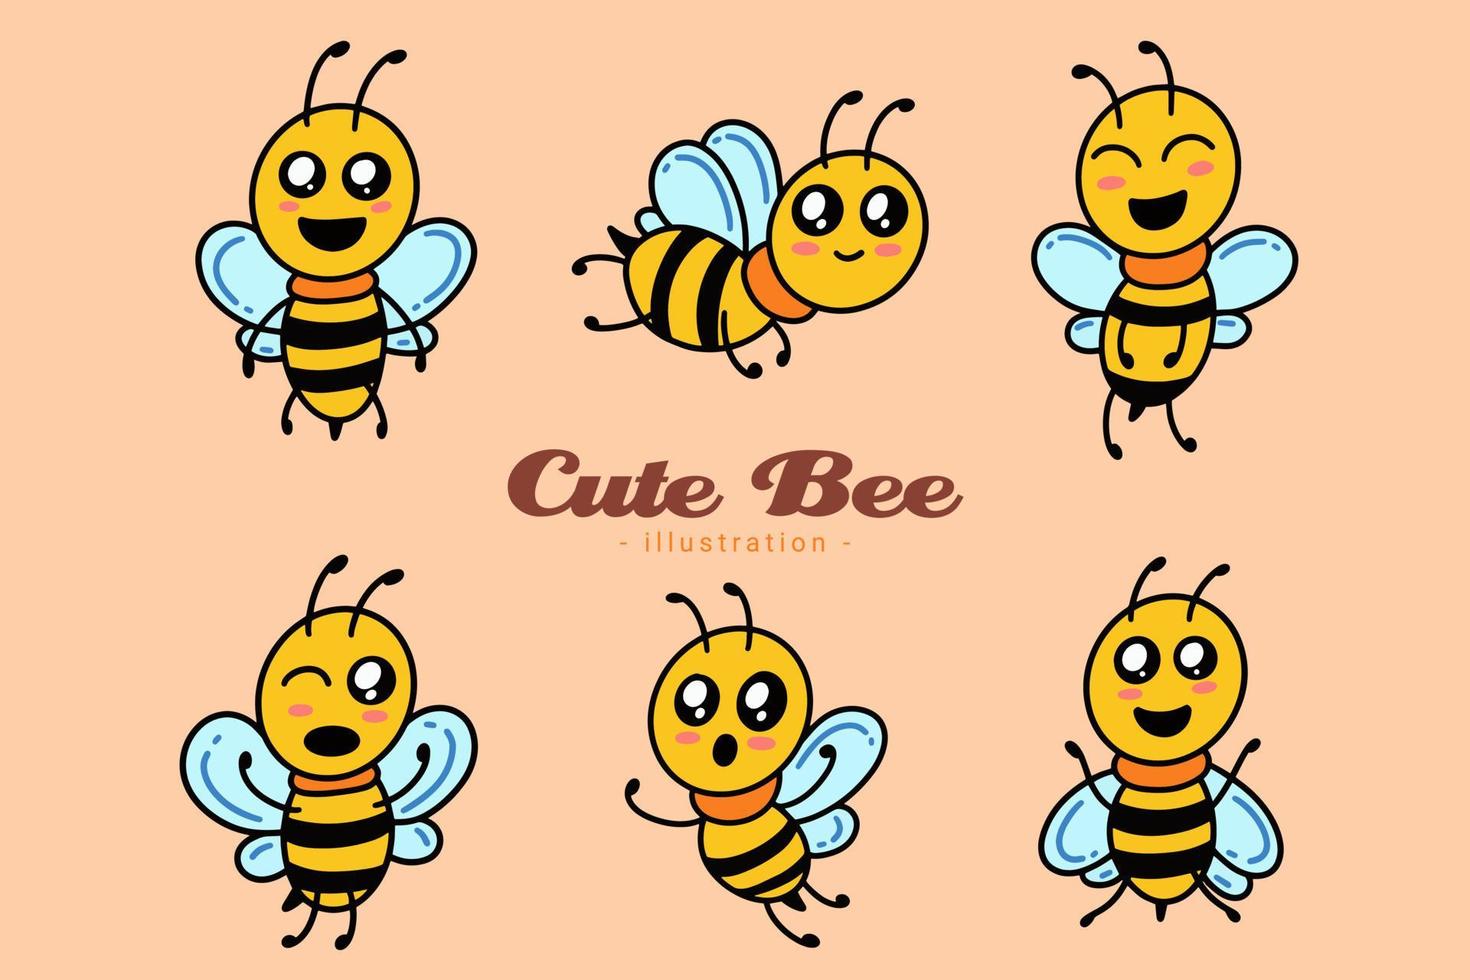 Set of Cute Bee Honey Animal with different pose cartoon clipart childish little bee mascot flat design vector